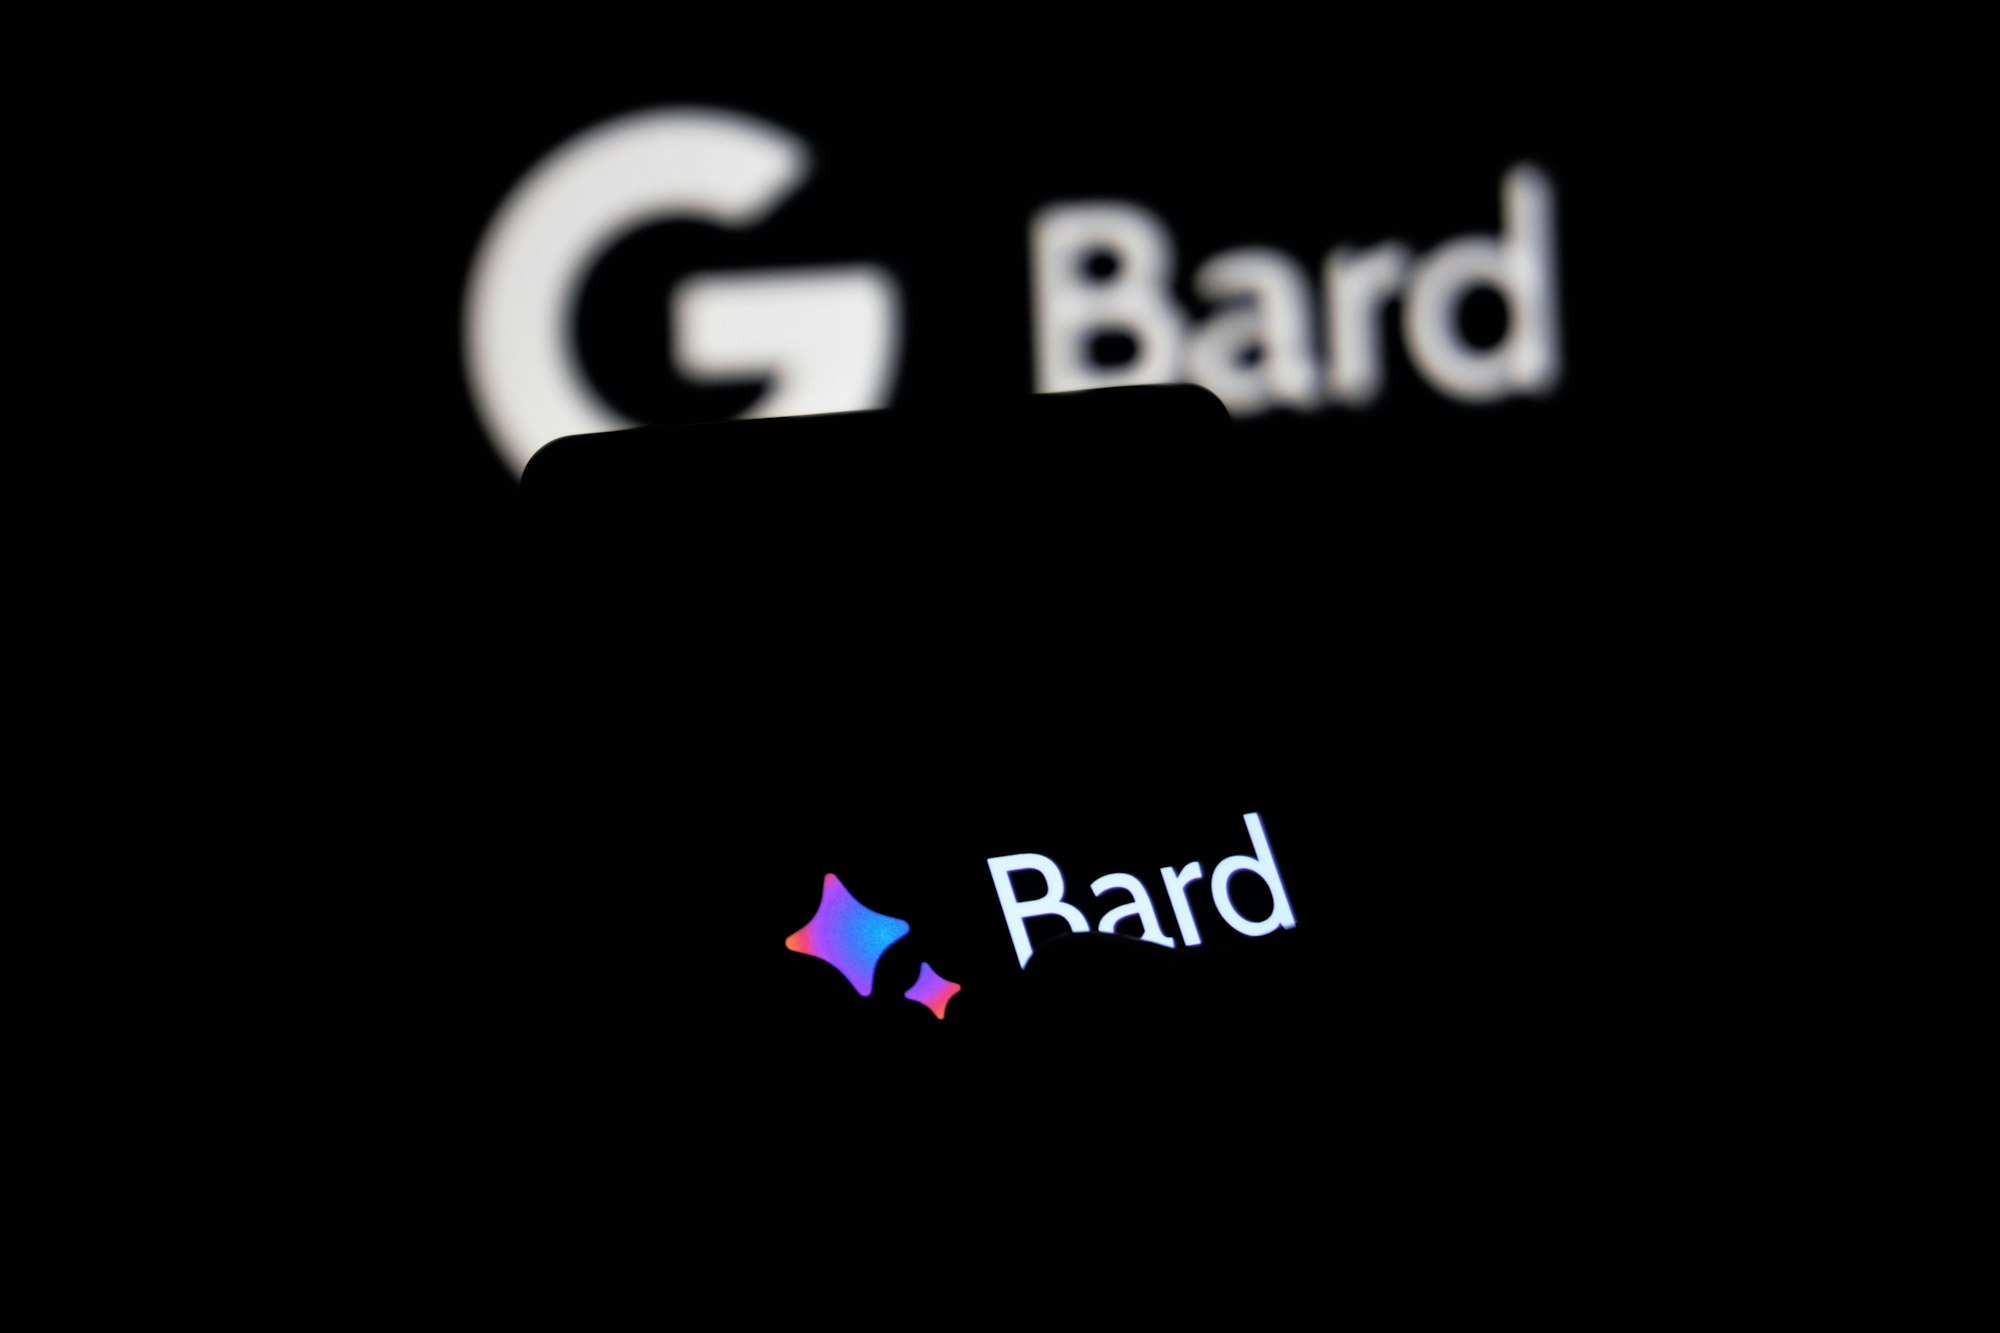 Google Bard unveils new integration feature with Google apps and services